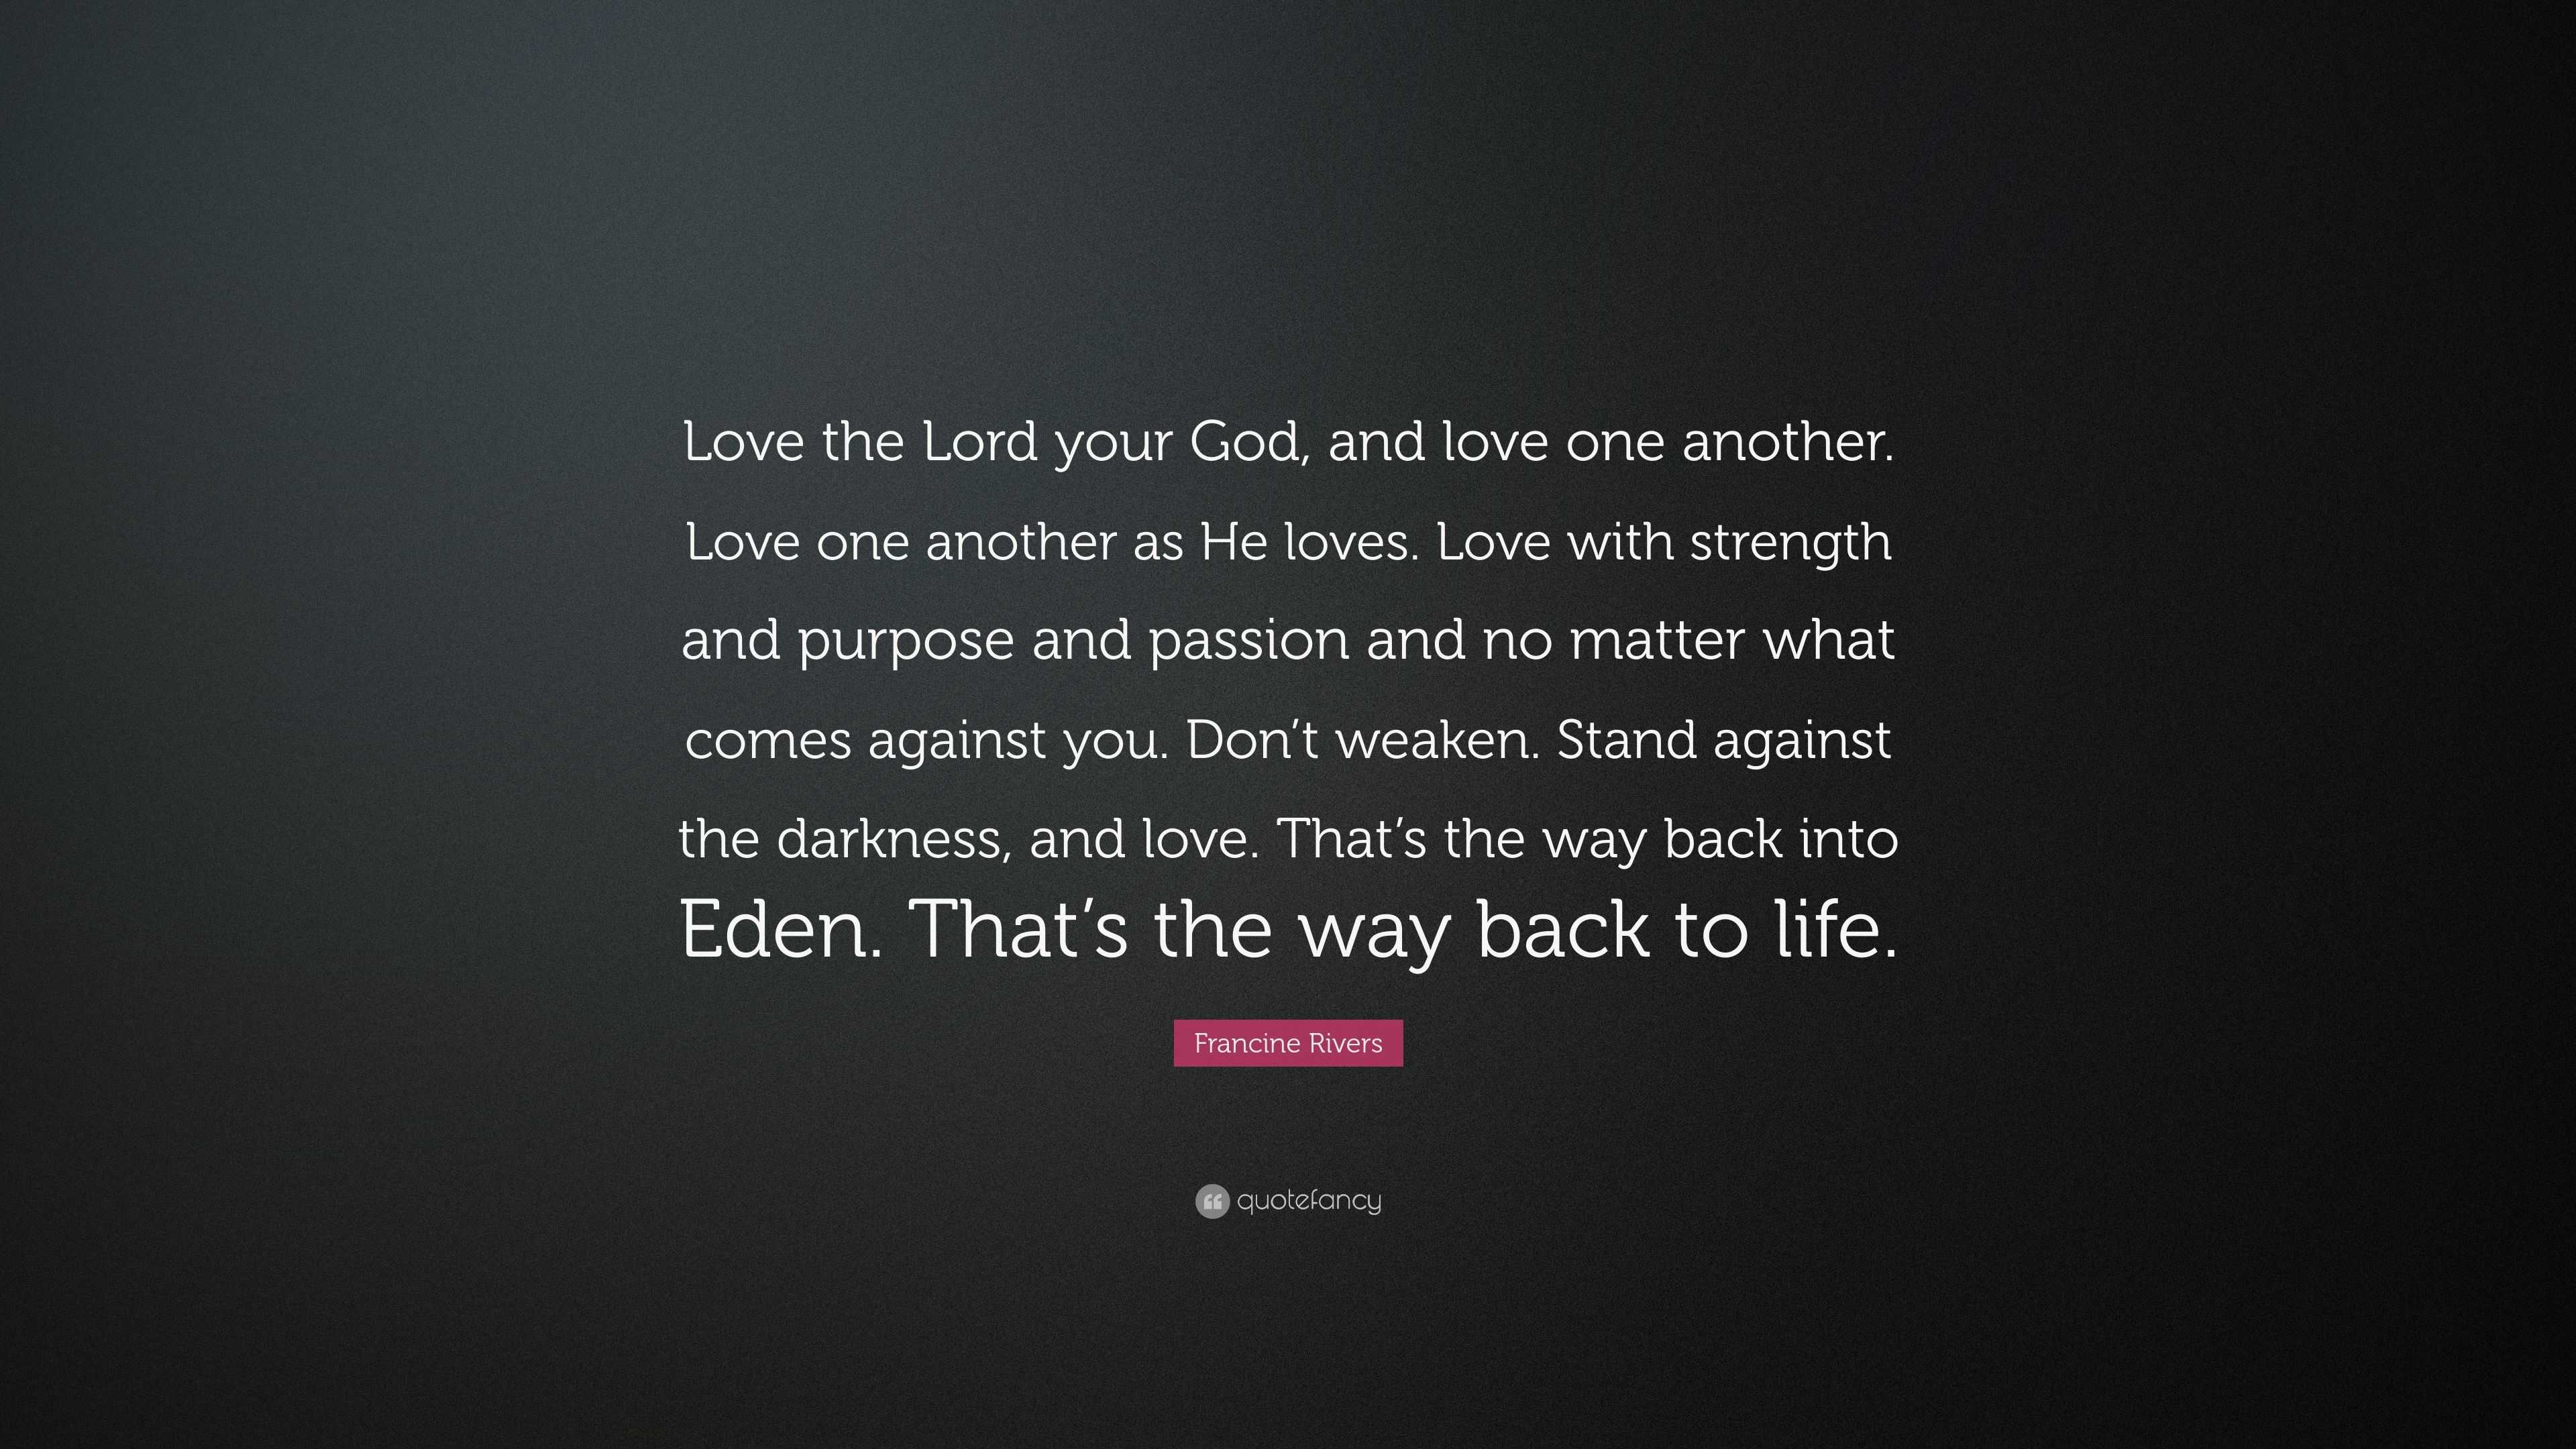 Francine Rivers Quote “Love the Lord your God and love one another